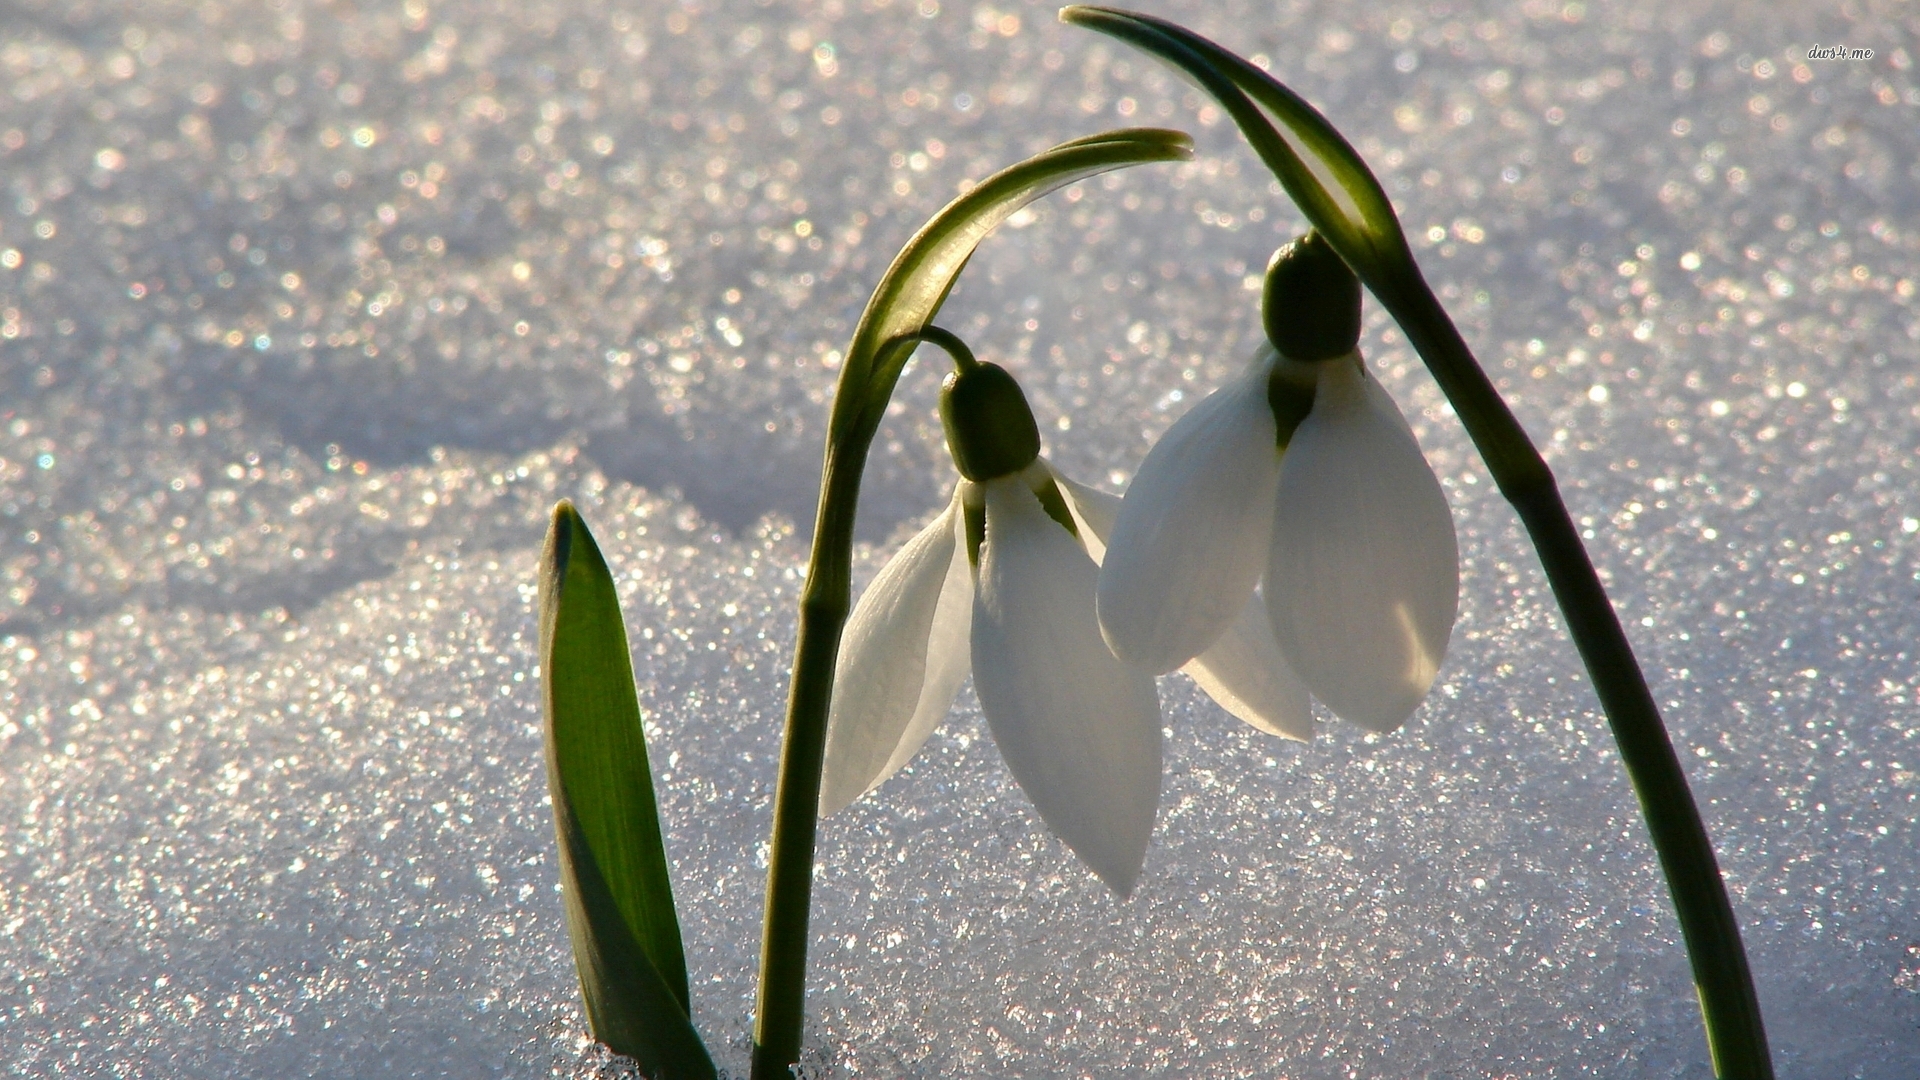 Snowdrops rising from the snow wallpaper wallpaper